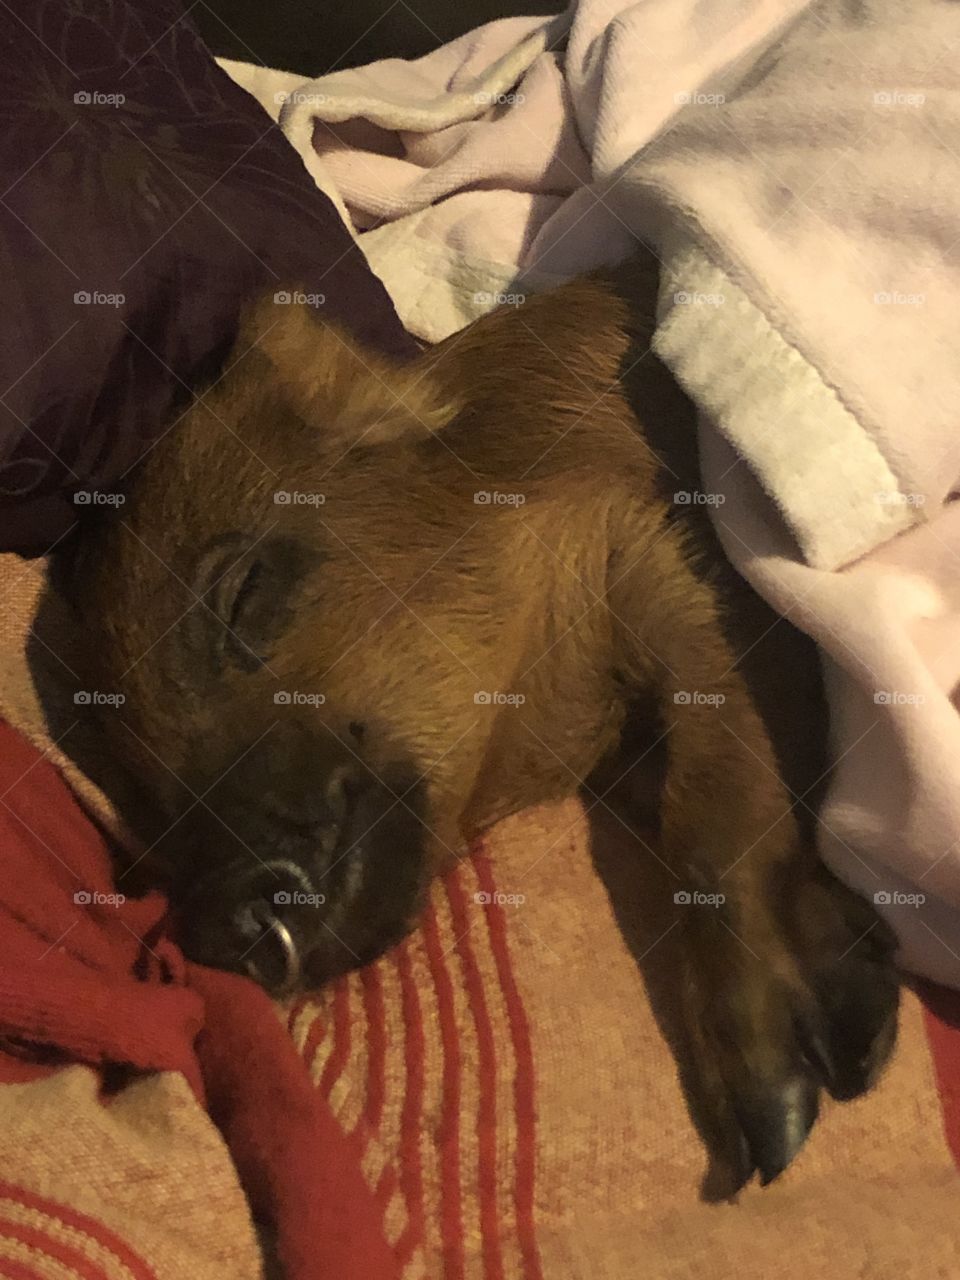 Ollie, our miniature pig, plum tuckered out after a long day of playing, exploring and foraging!